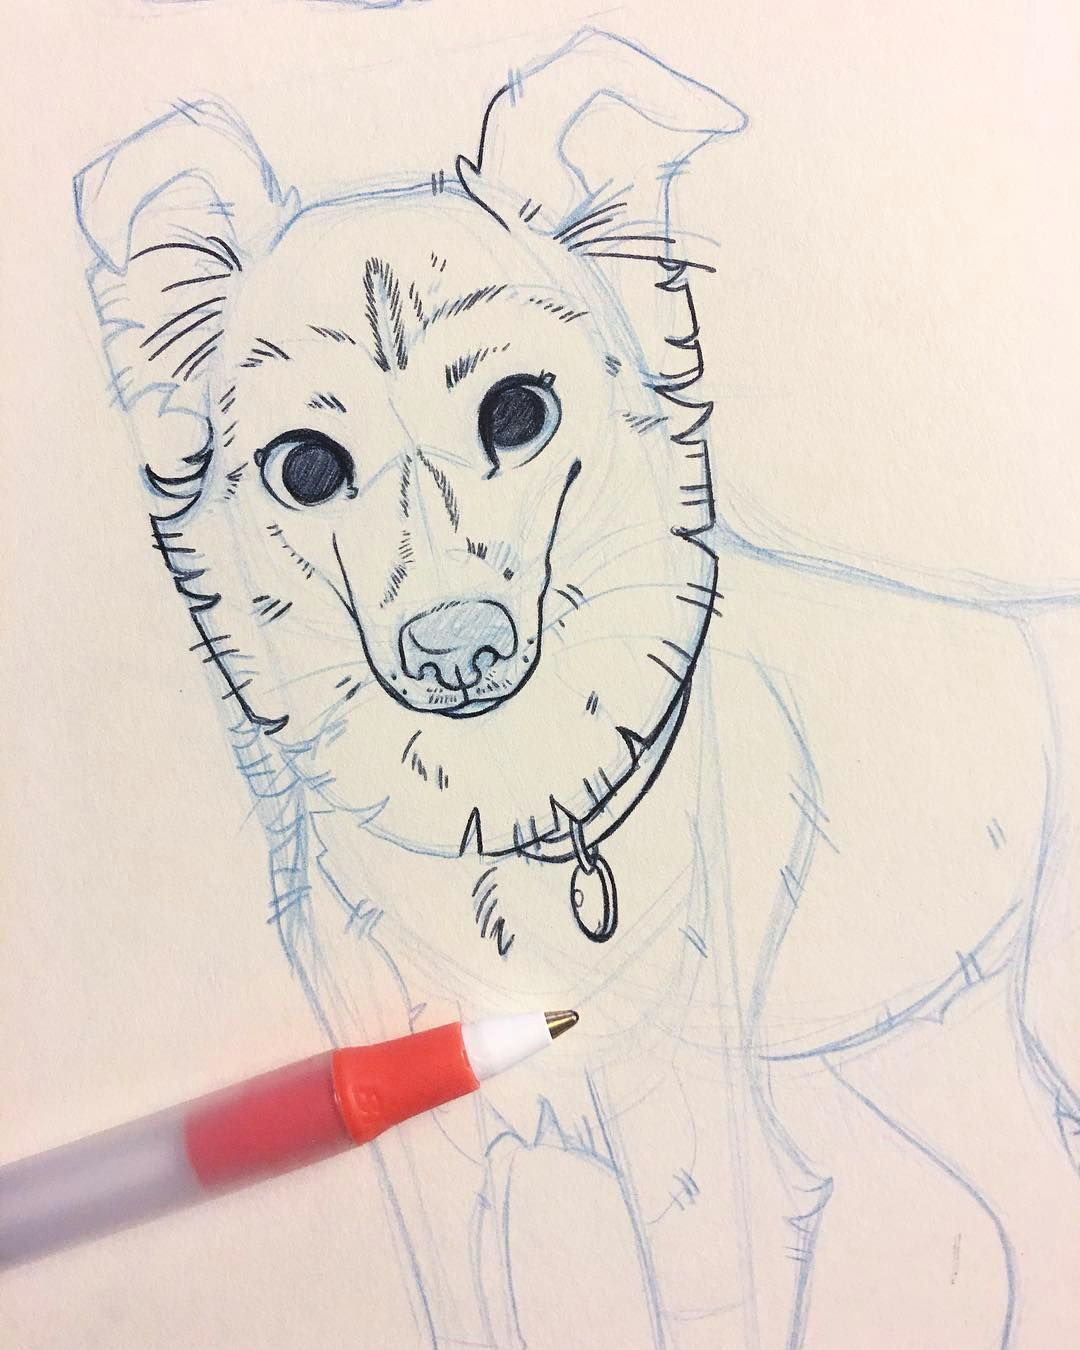 Drawing Of Dogs Comic Making Up A New Pet Portrait for Salt Lake City Comic Con This One